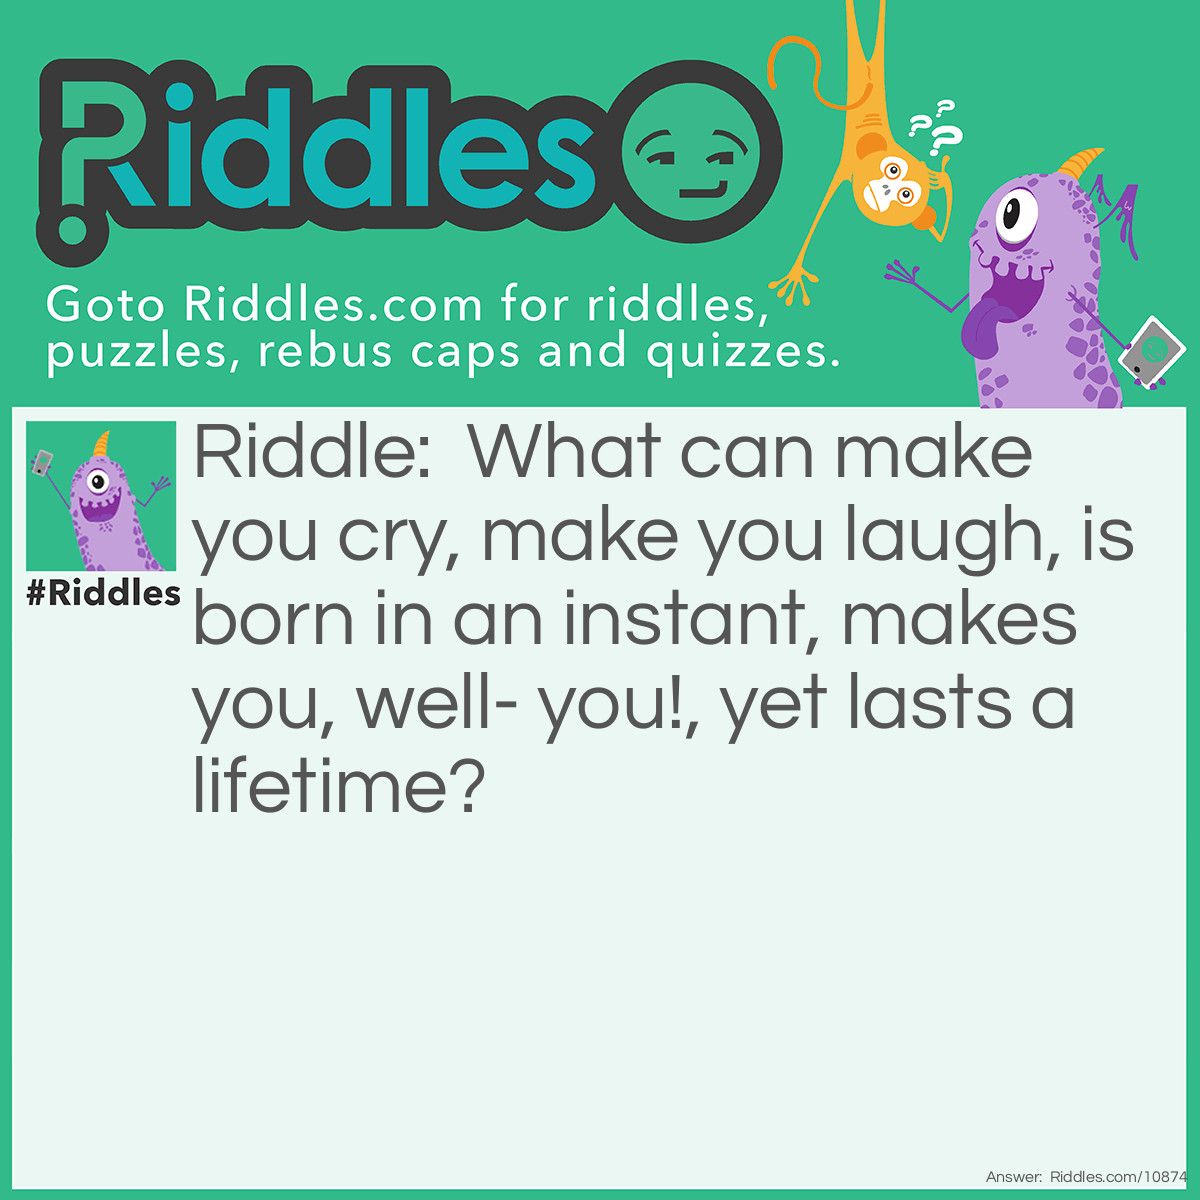 Riddle: What can make you cry, make you laugh, is born in an instant, makes you, well- you!, yet lasts a lifetime? Answer: A memory!